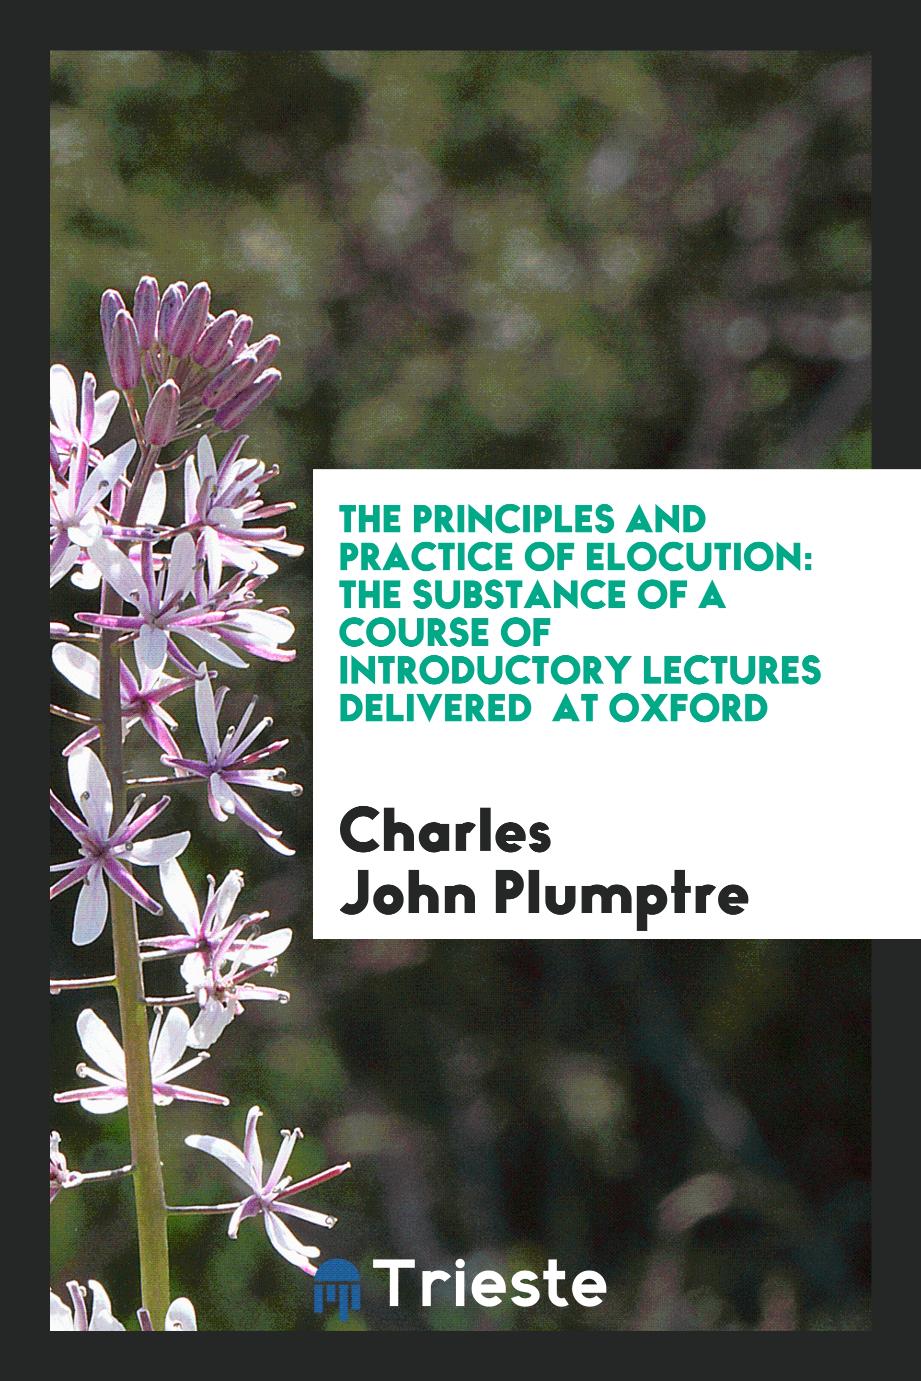 The principles and practice of elocution: the substance of a course of introductory lectures delivered at Oxford